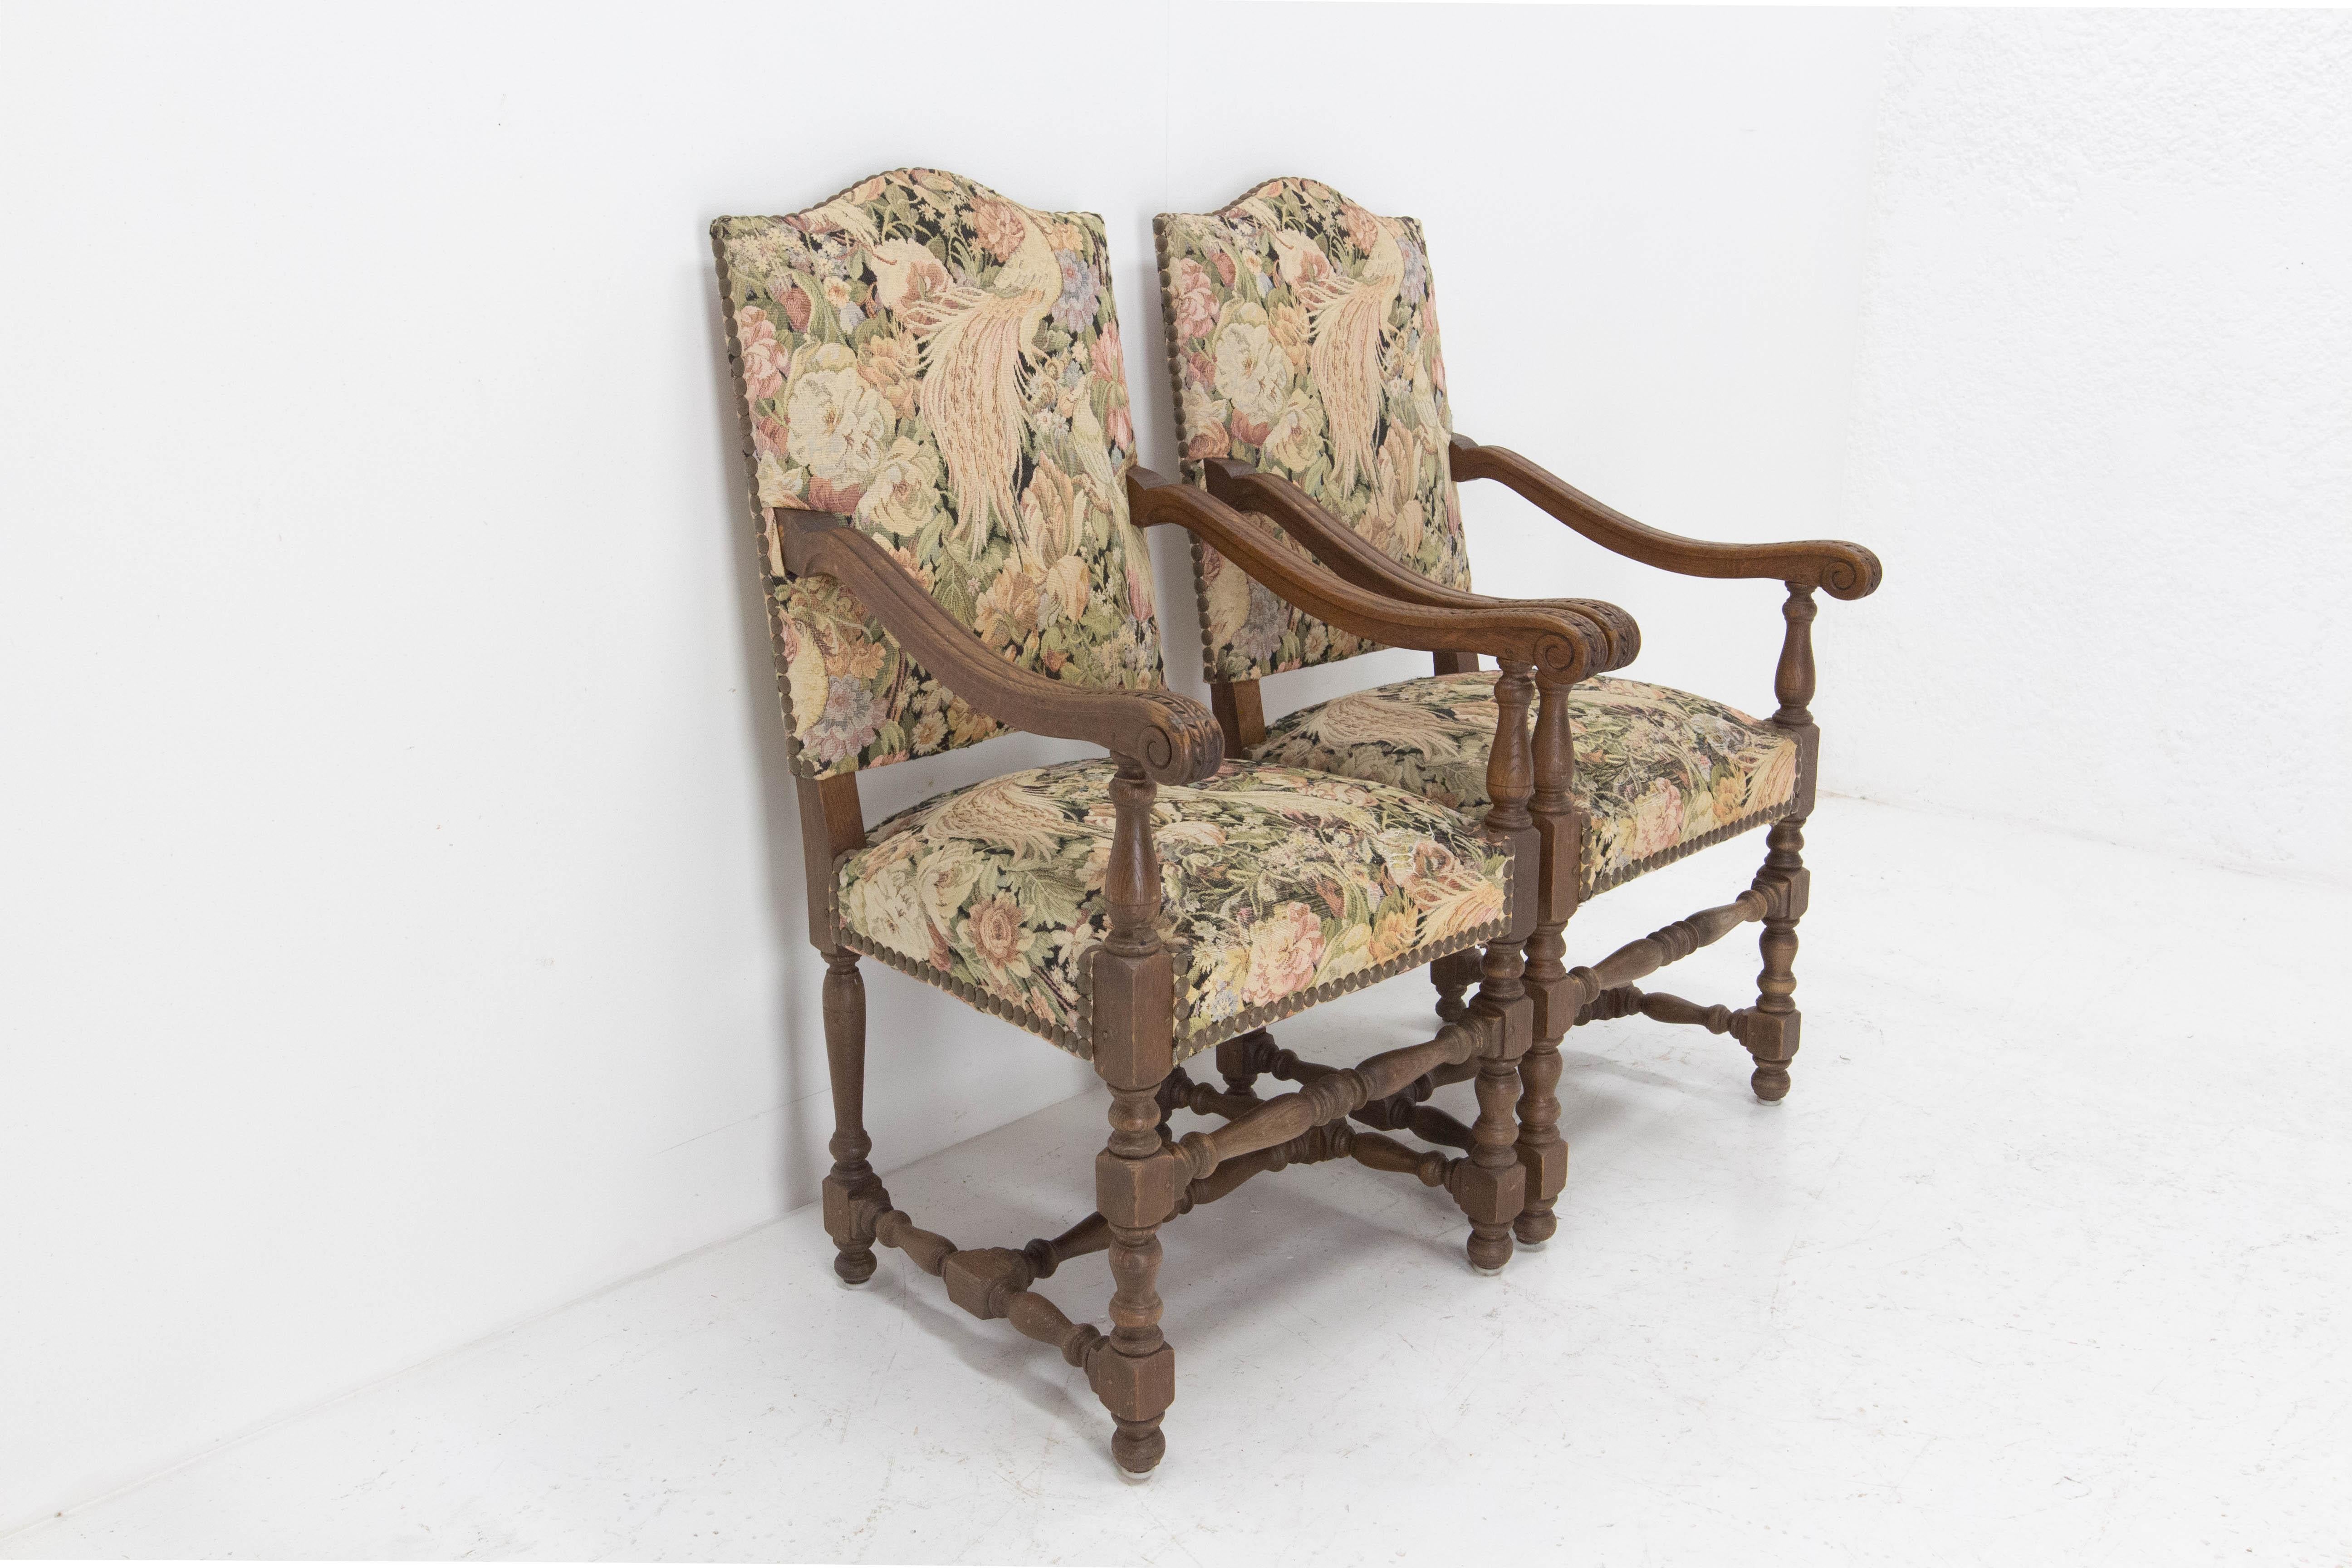 Pair of French fauteuils, open armchairs side or desk chairs Louis XIV revival,
To be recover to suit your interior
circa 1880
Good condition
Frames sound and solid.

Shipping:
Shipping L 112 P 68 H110 30kg.